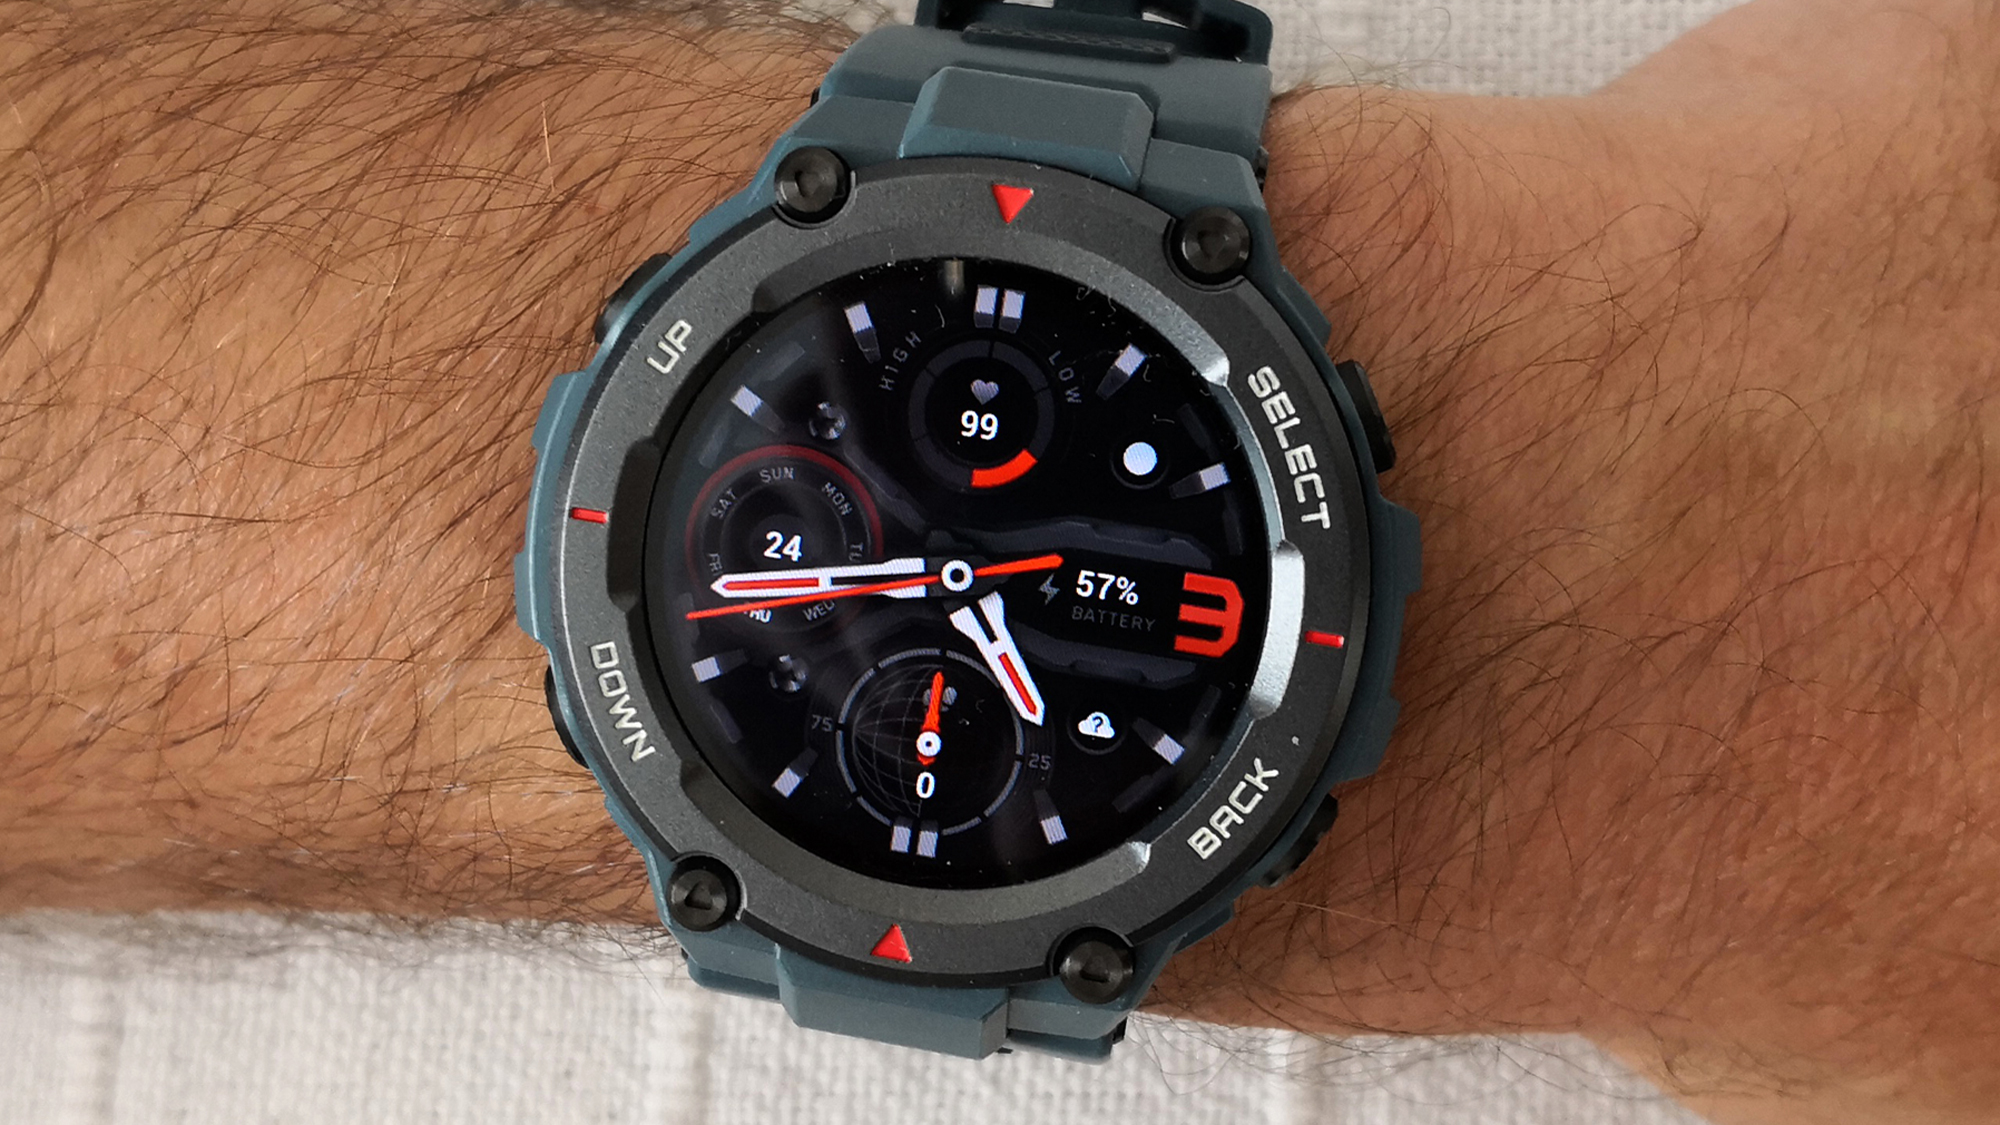 Amazfit T-Rex 2 review: Fitness watch with rugged design, long